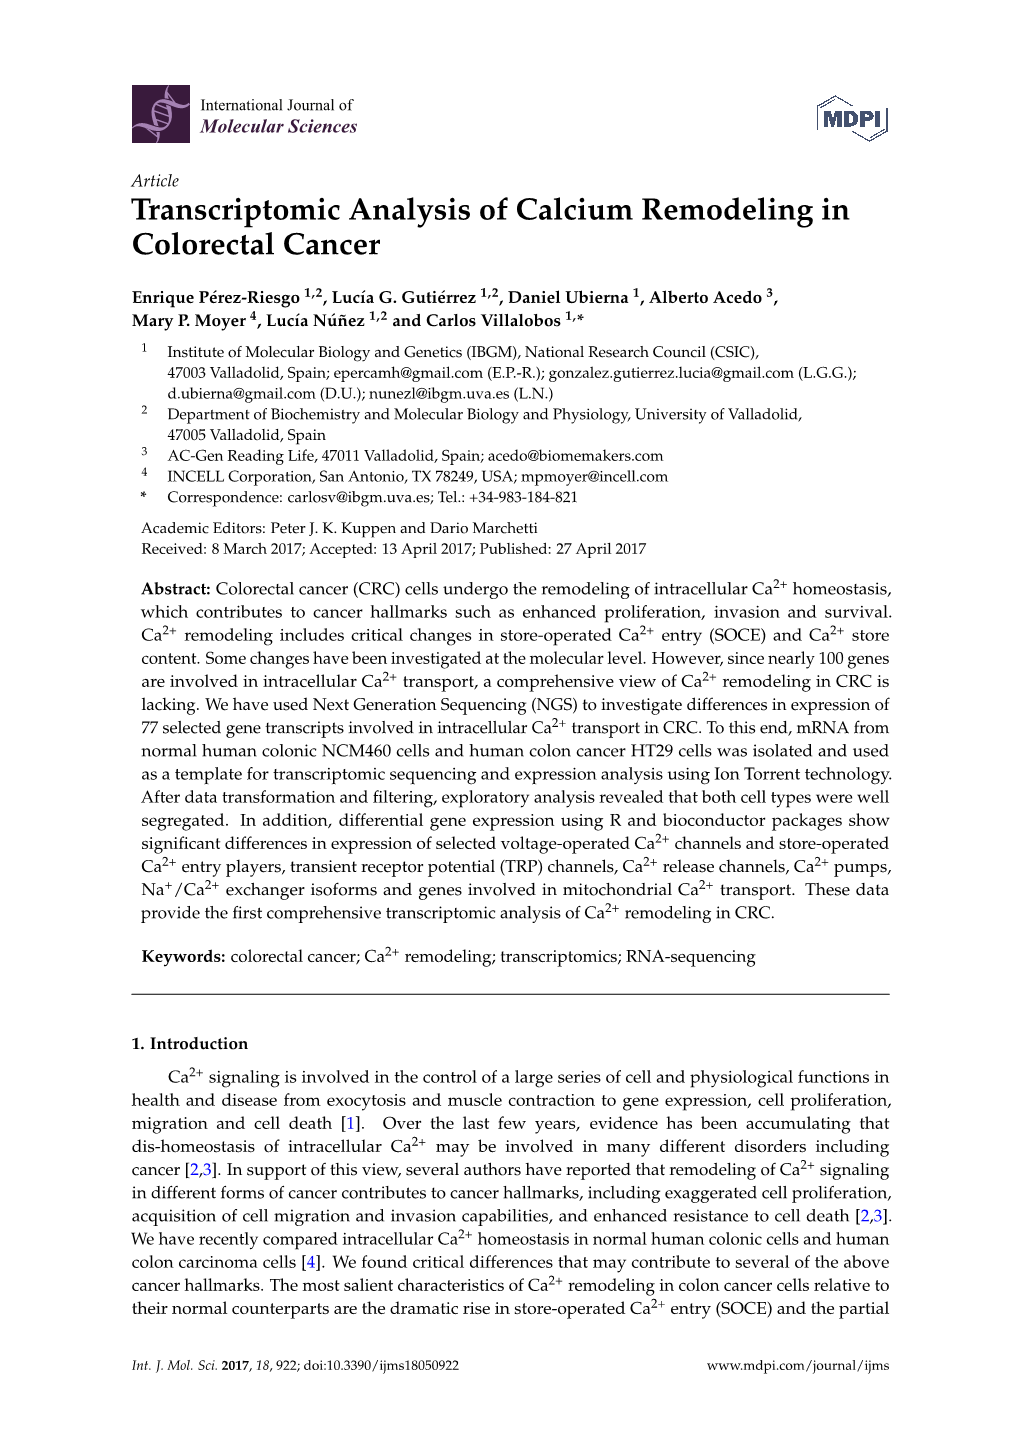 Transcriptomic Analysis of Calcium Remodeling in Colorectal Cancer